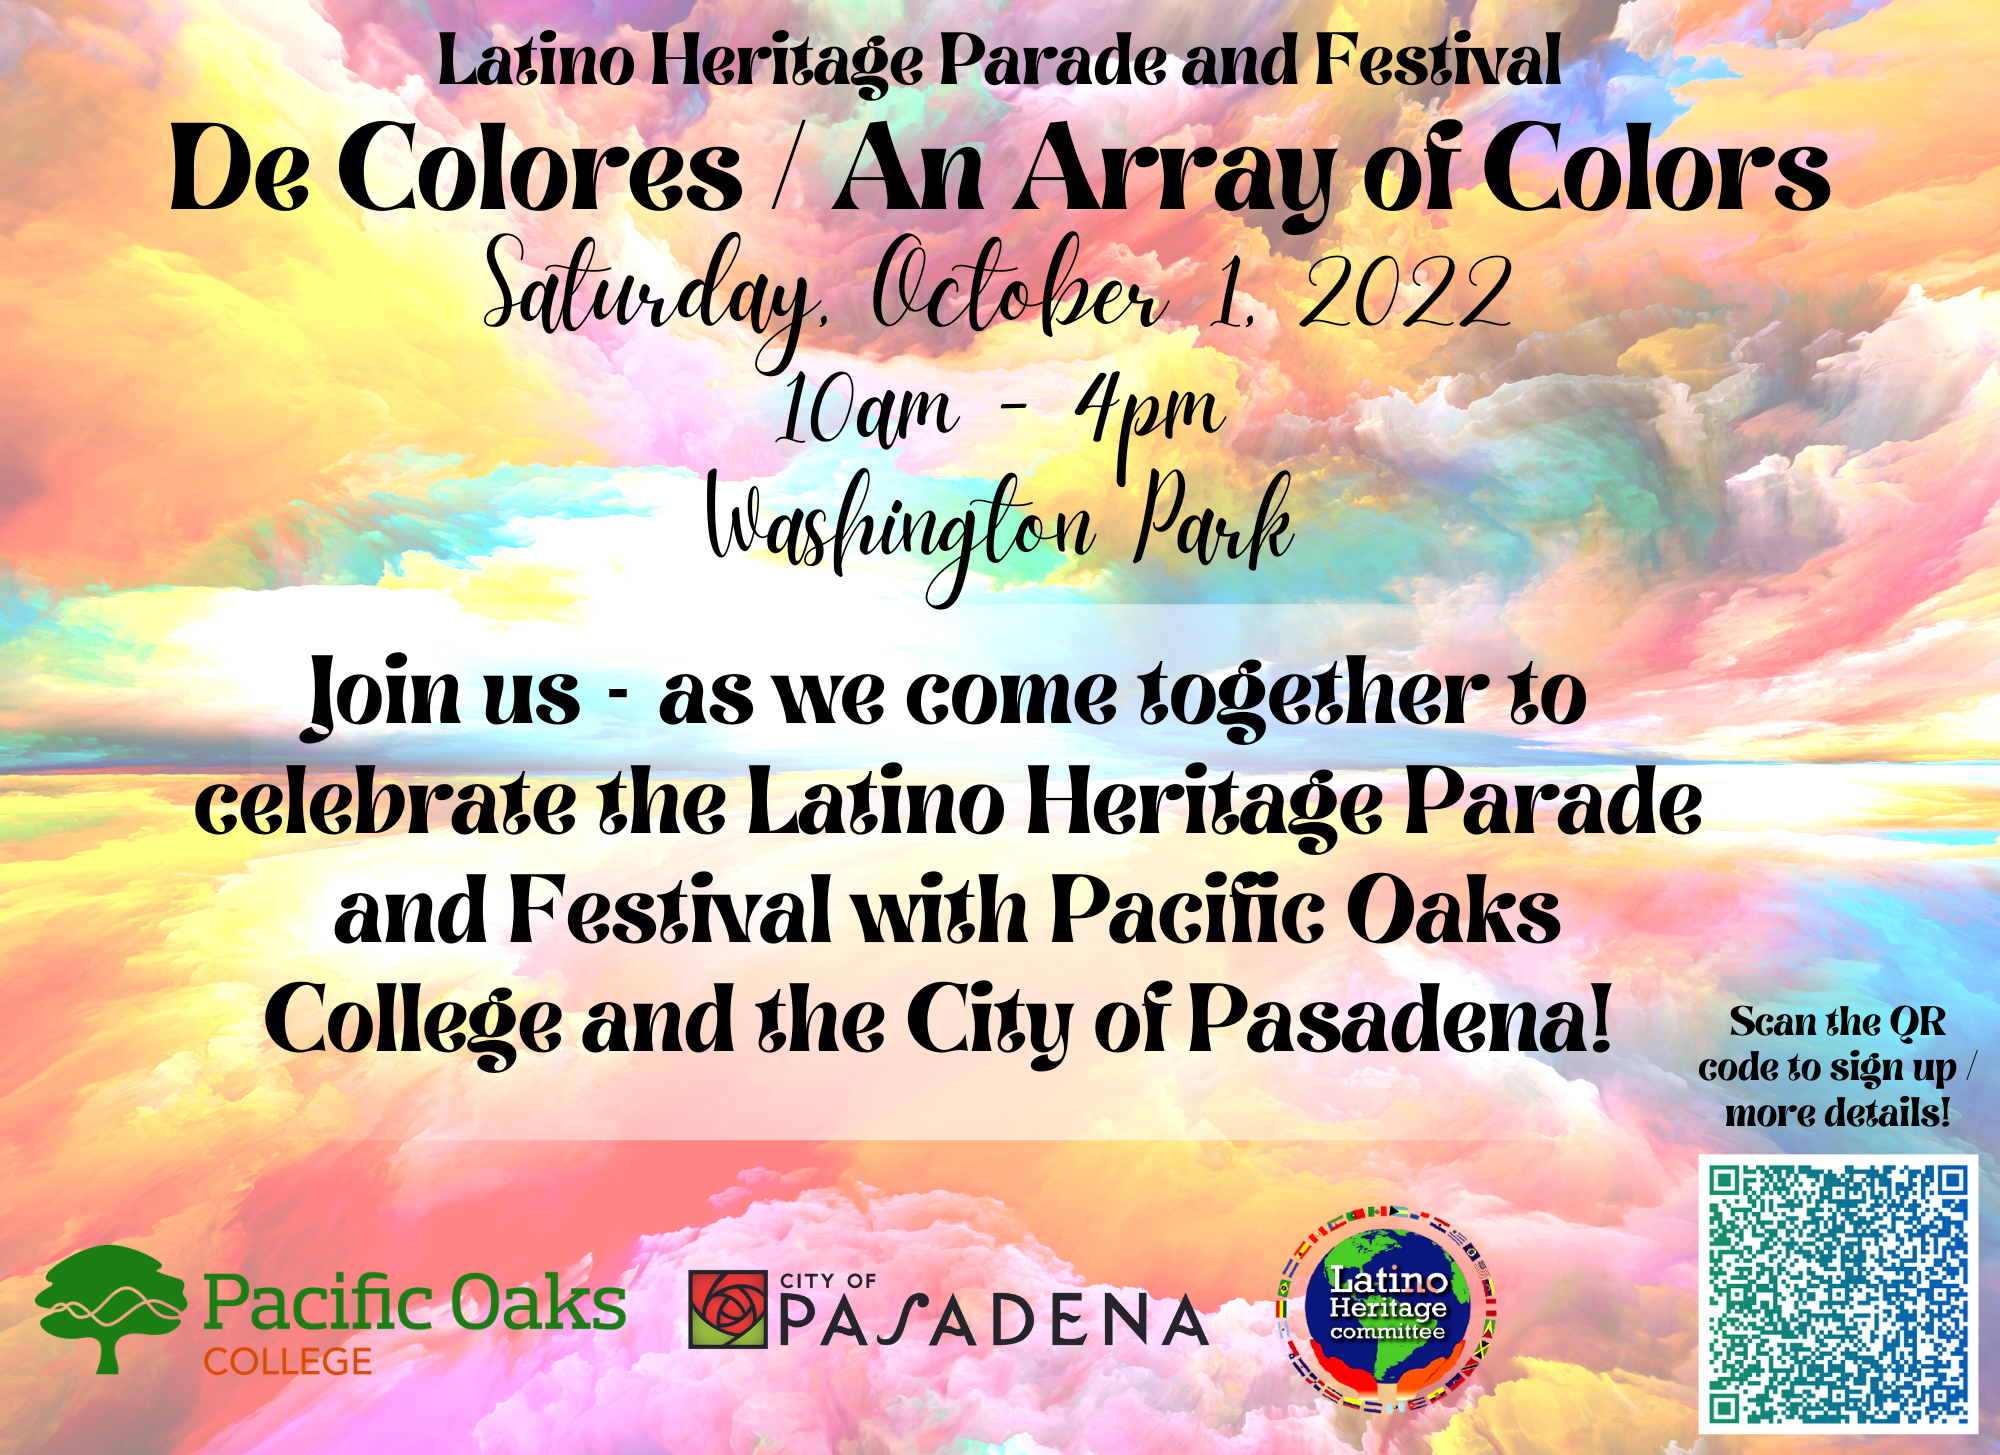 Latino Heritage Parade and Festival Flyer.png